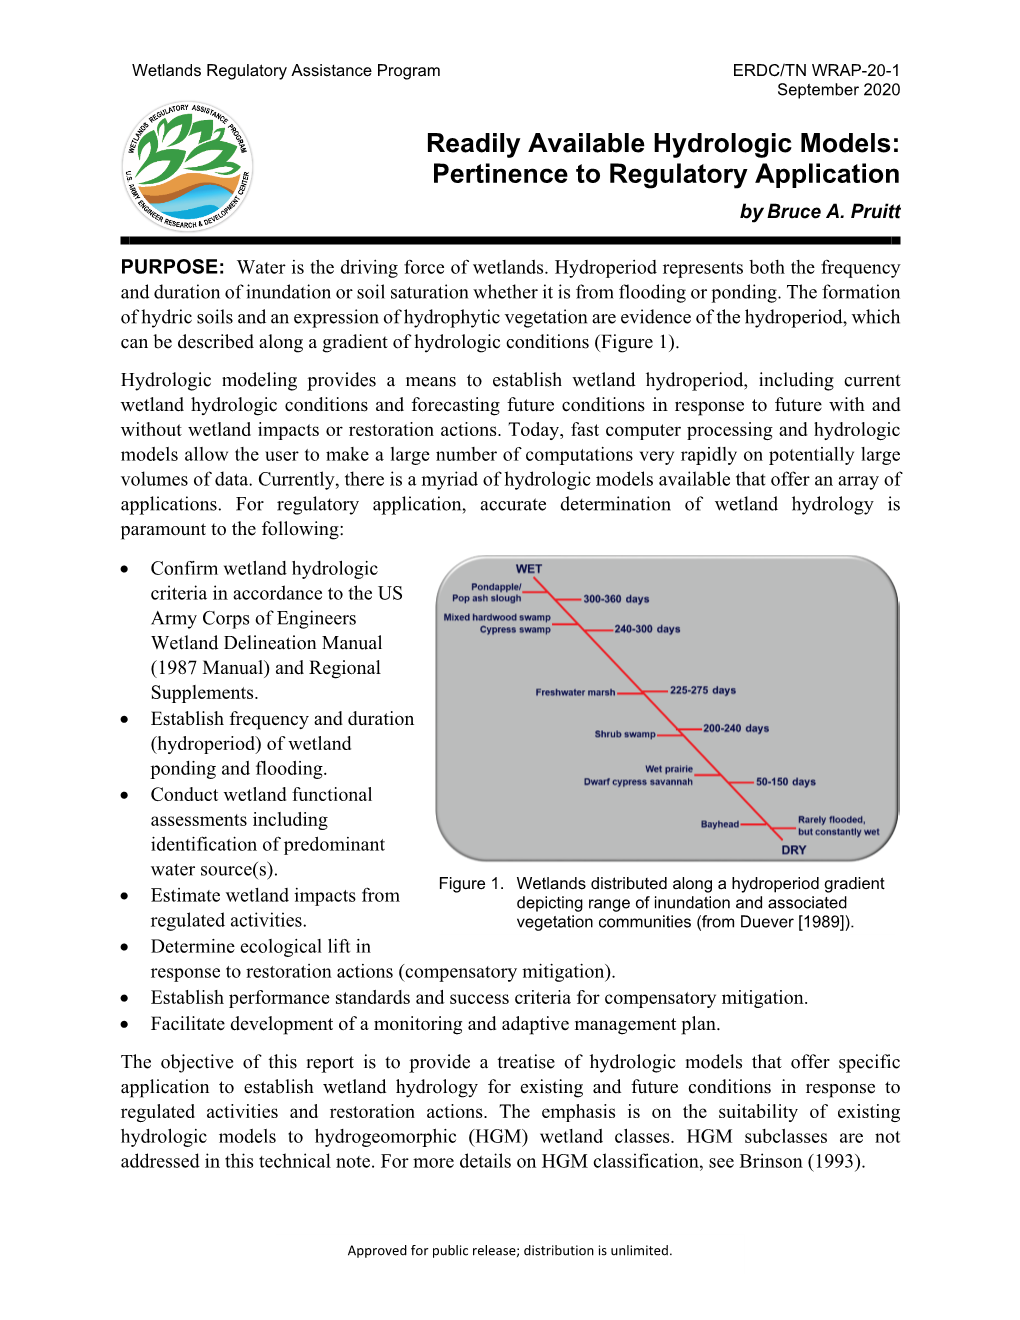 Readily Available Hydrologic Models : Pertinence to Regulatory Application